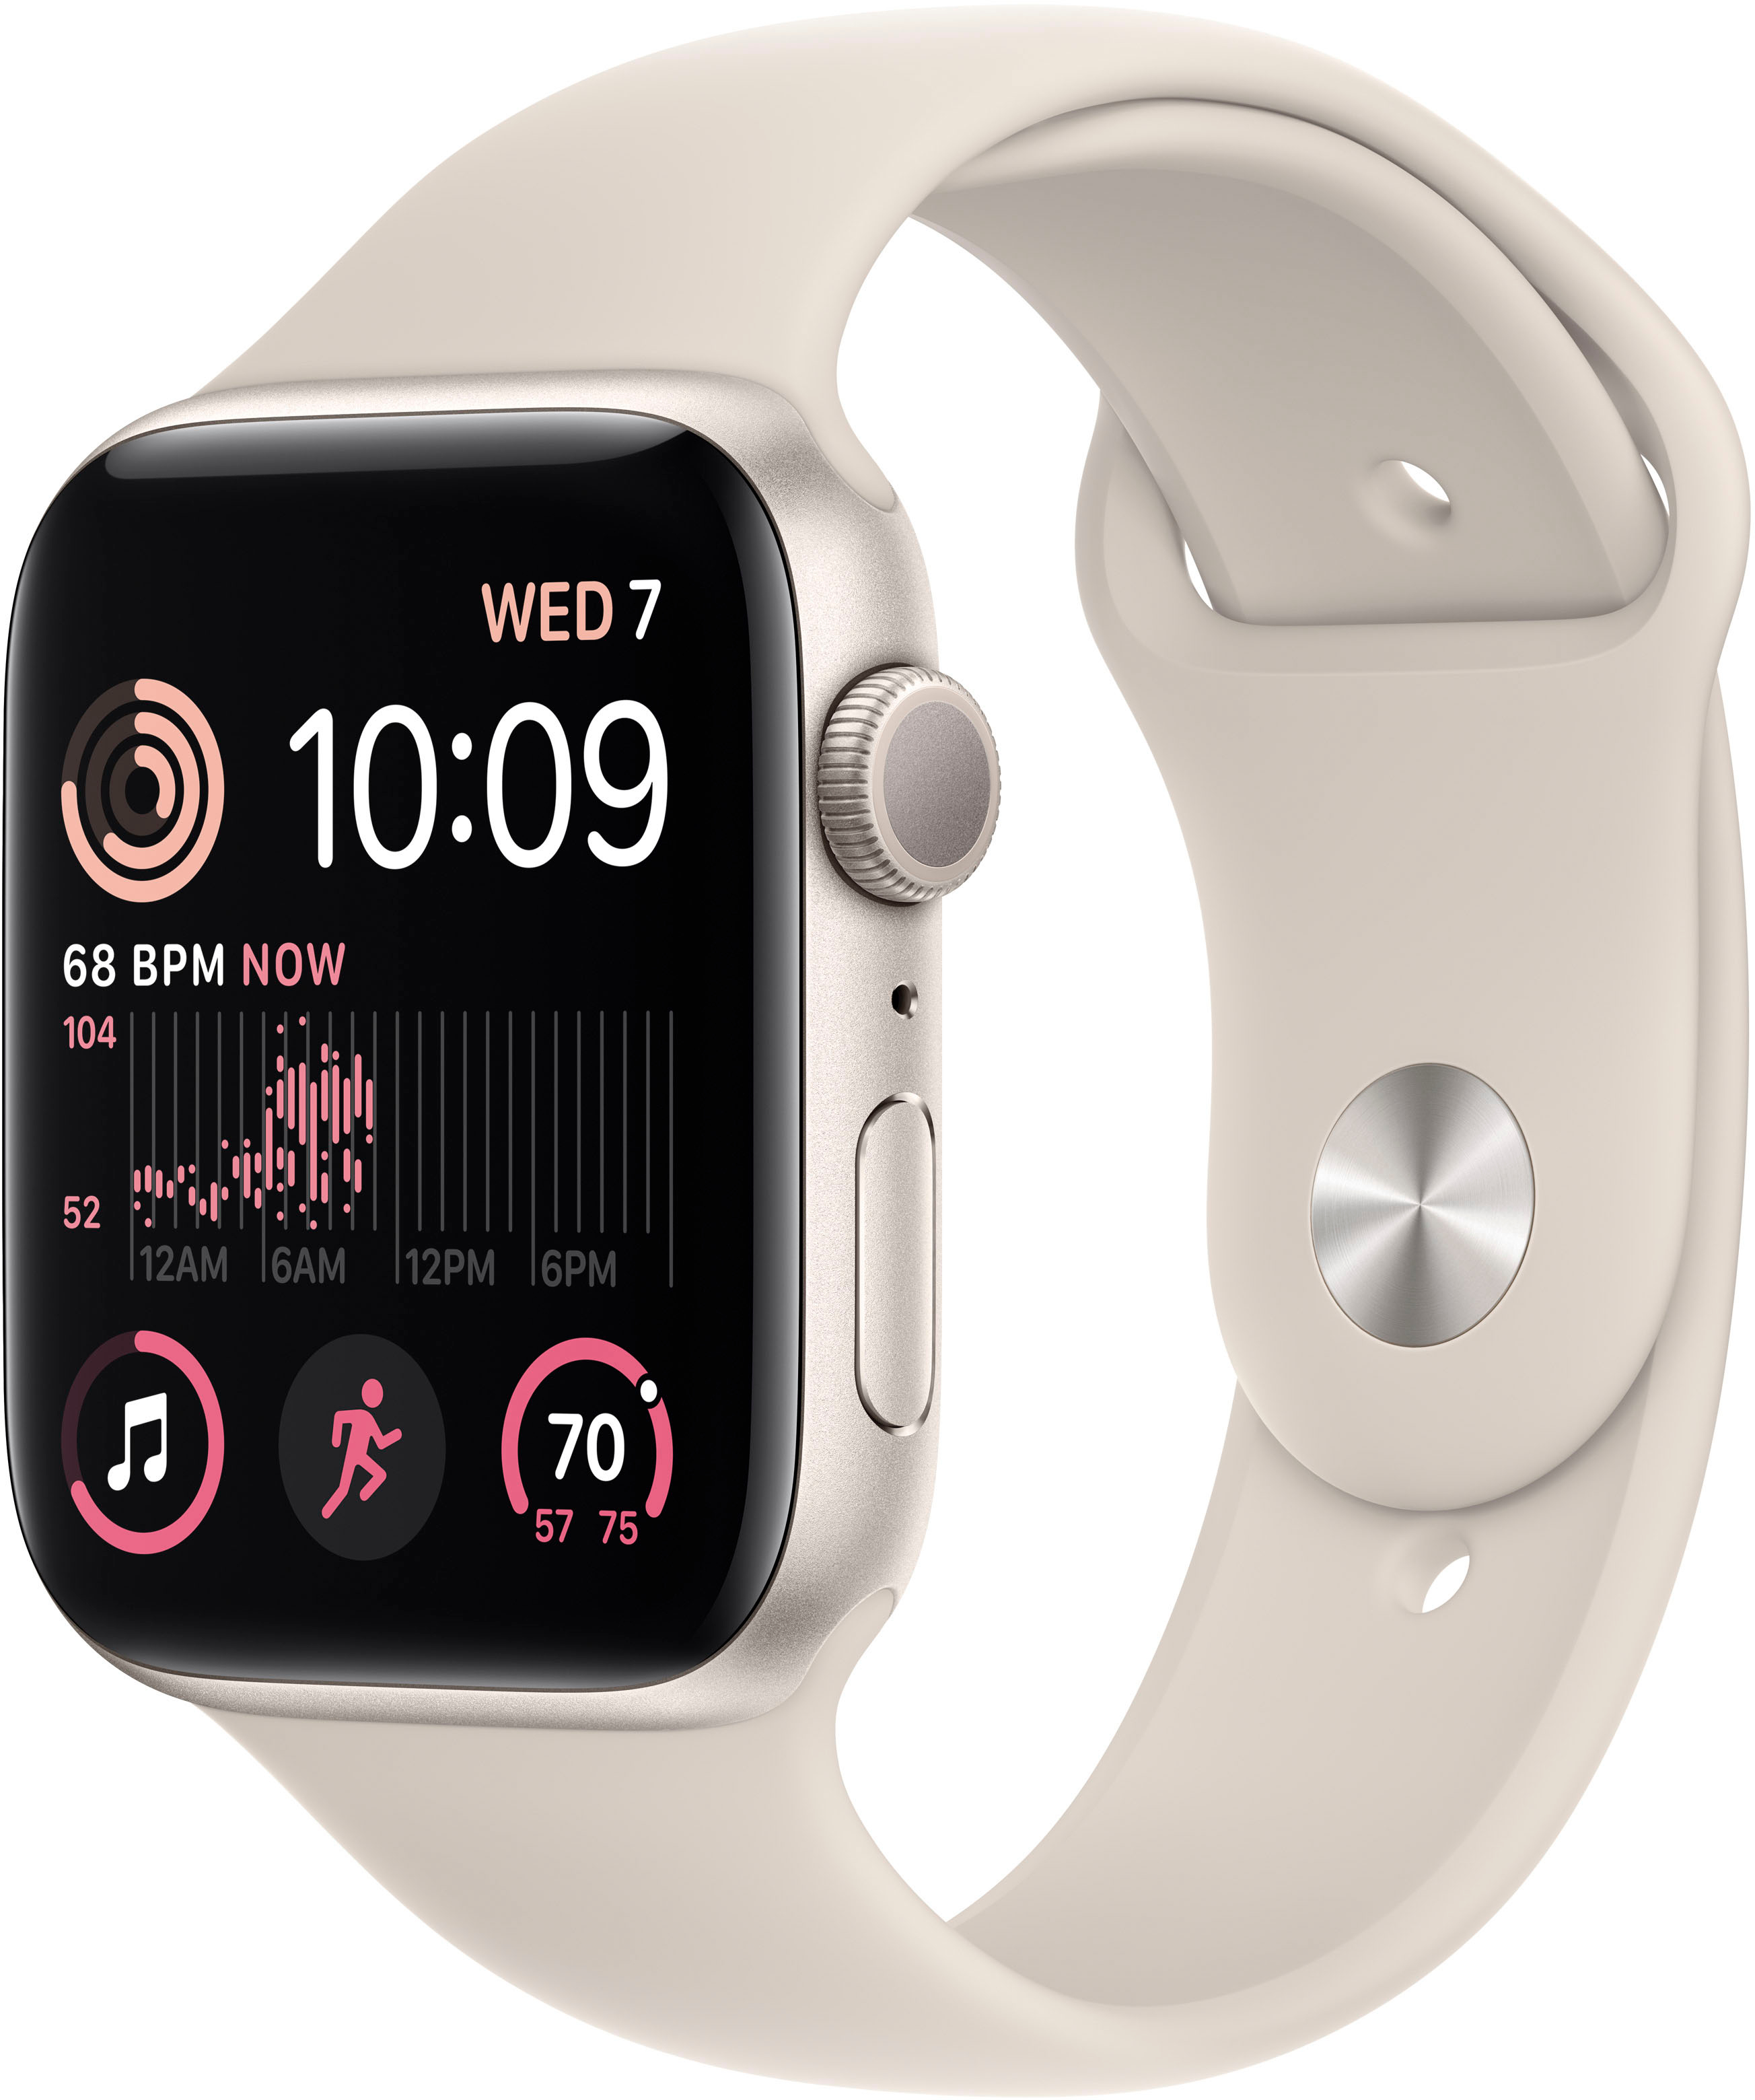 Apple Watch Series 2: The smart person's guide